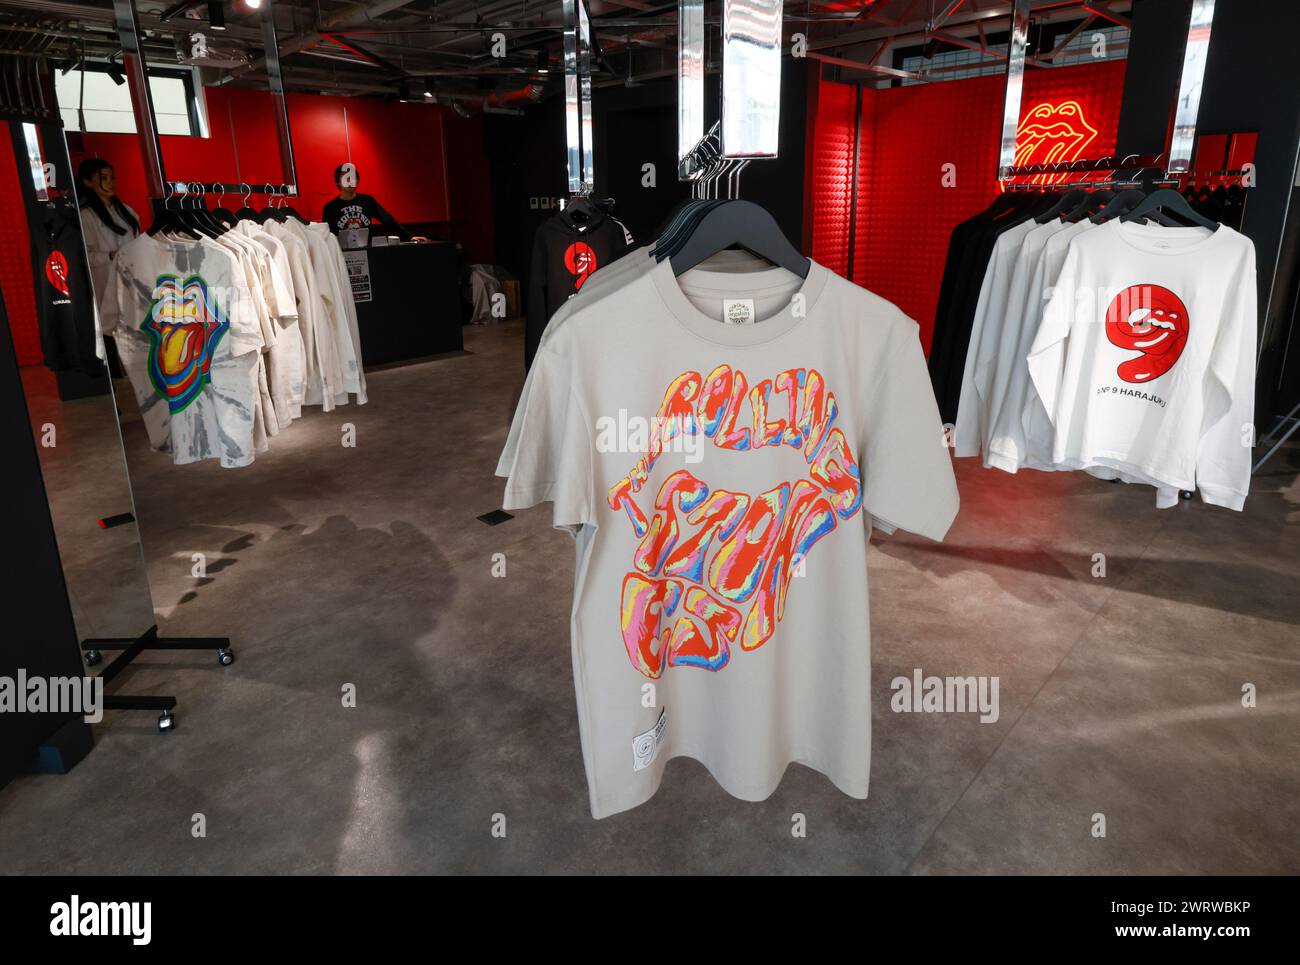 THE ROLLING STONES OFFICIAL RS No.9 APPAREL IN TOKYO Stock Photo